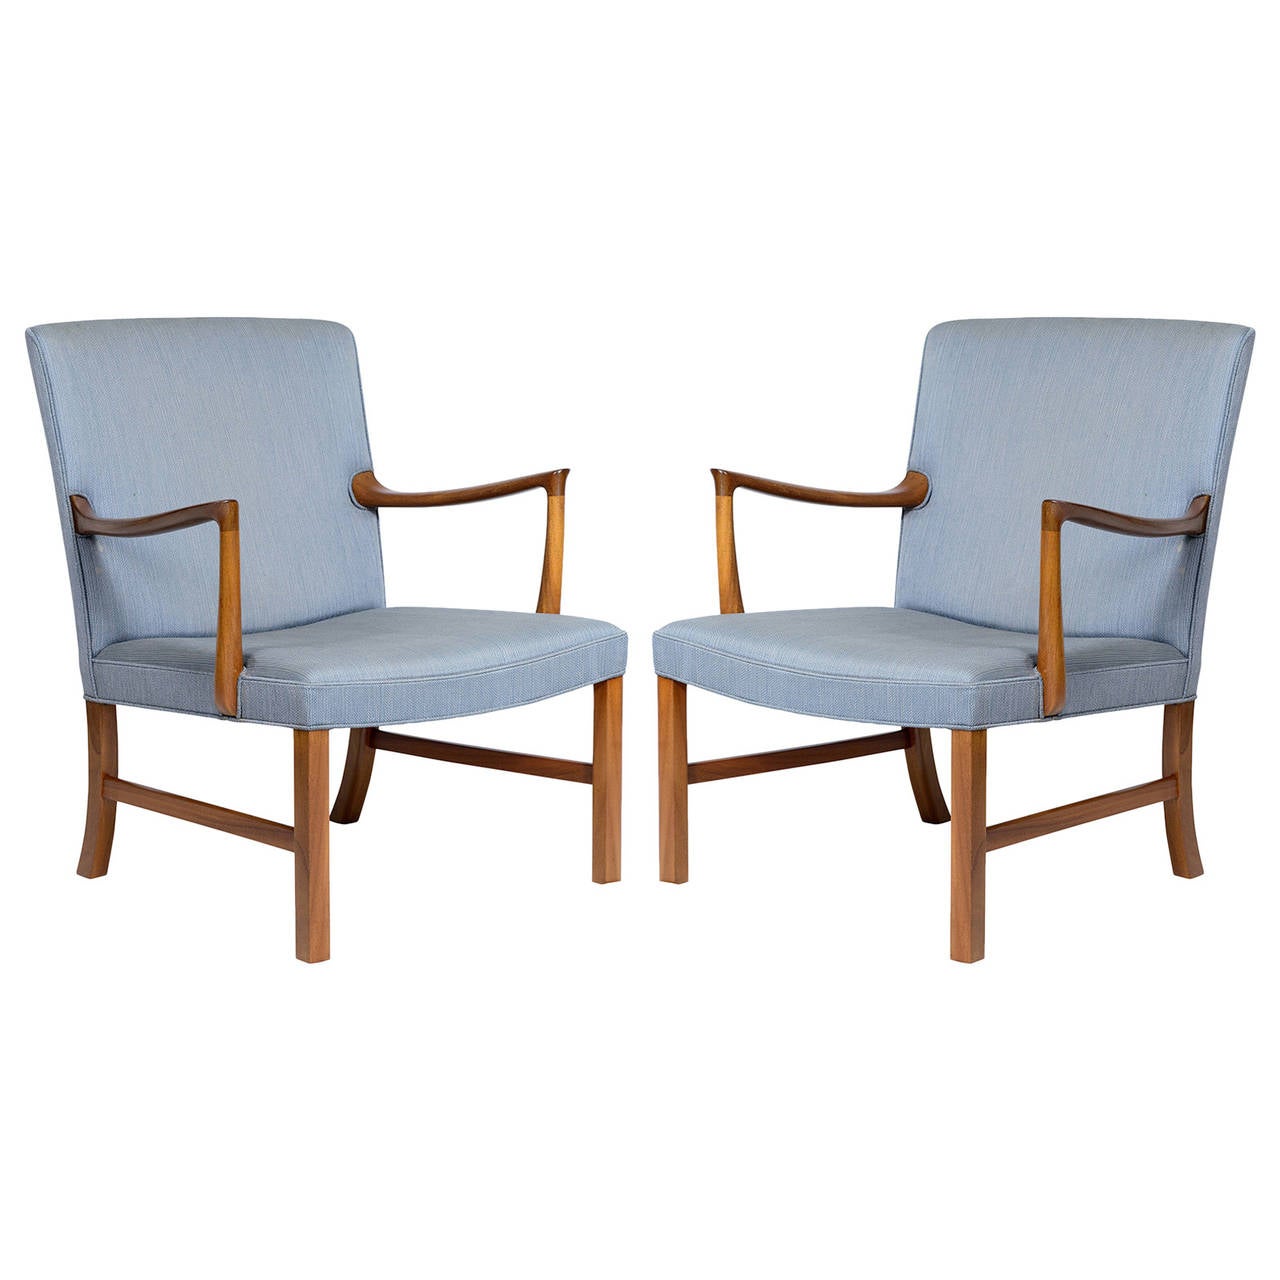 Ole Wanscher lounge chairs, 1950s, offered by Denmark 50